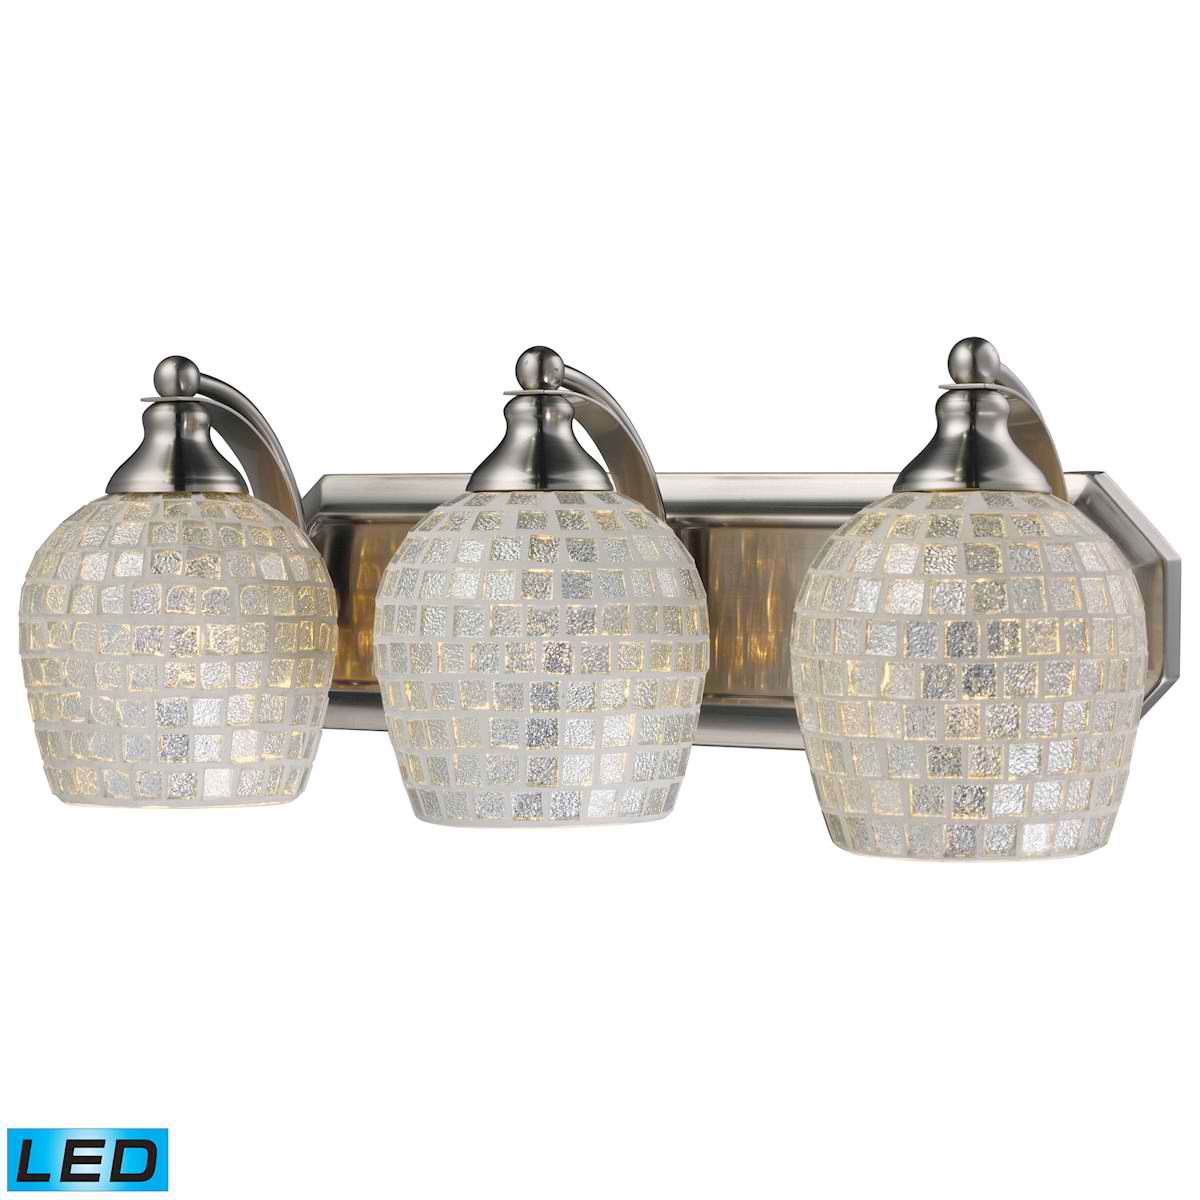 3 Light Vanity in Satin Nickel and Silver Mosaic Glass - LED, 800 Lumens (2400 Lumens Total) with Full Scale